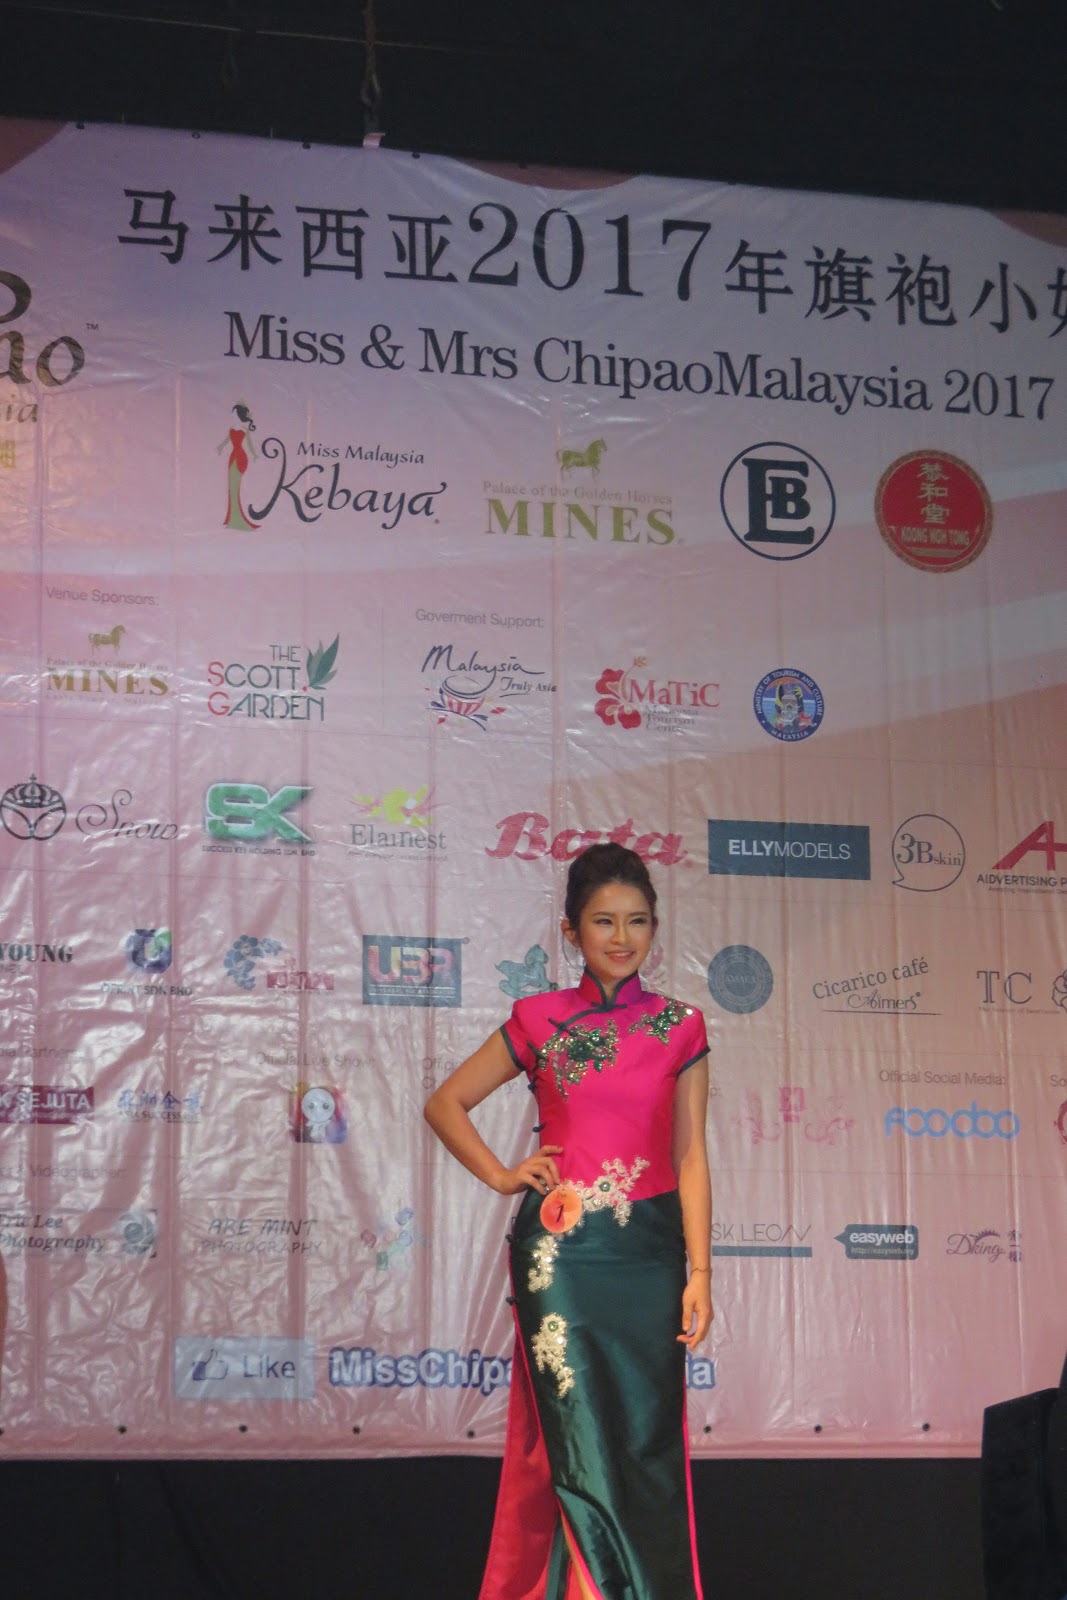 Kee Hua Chee Live!: PART 2---MISS CHI PAO MALAYSIA WAS WON BY ELLICIA ...